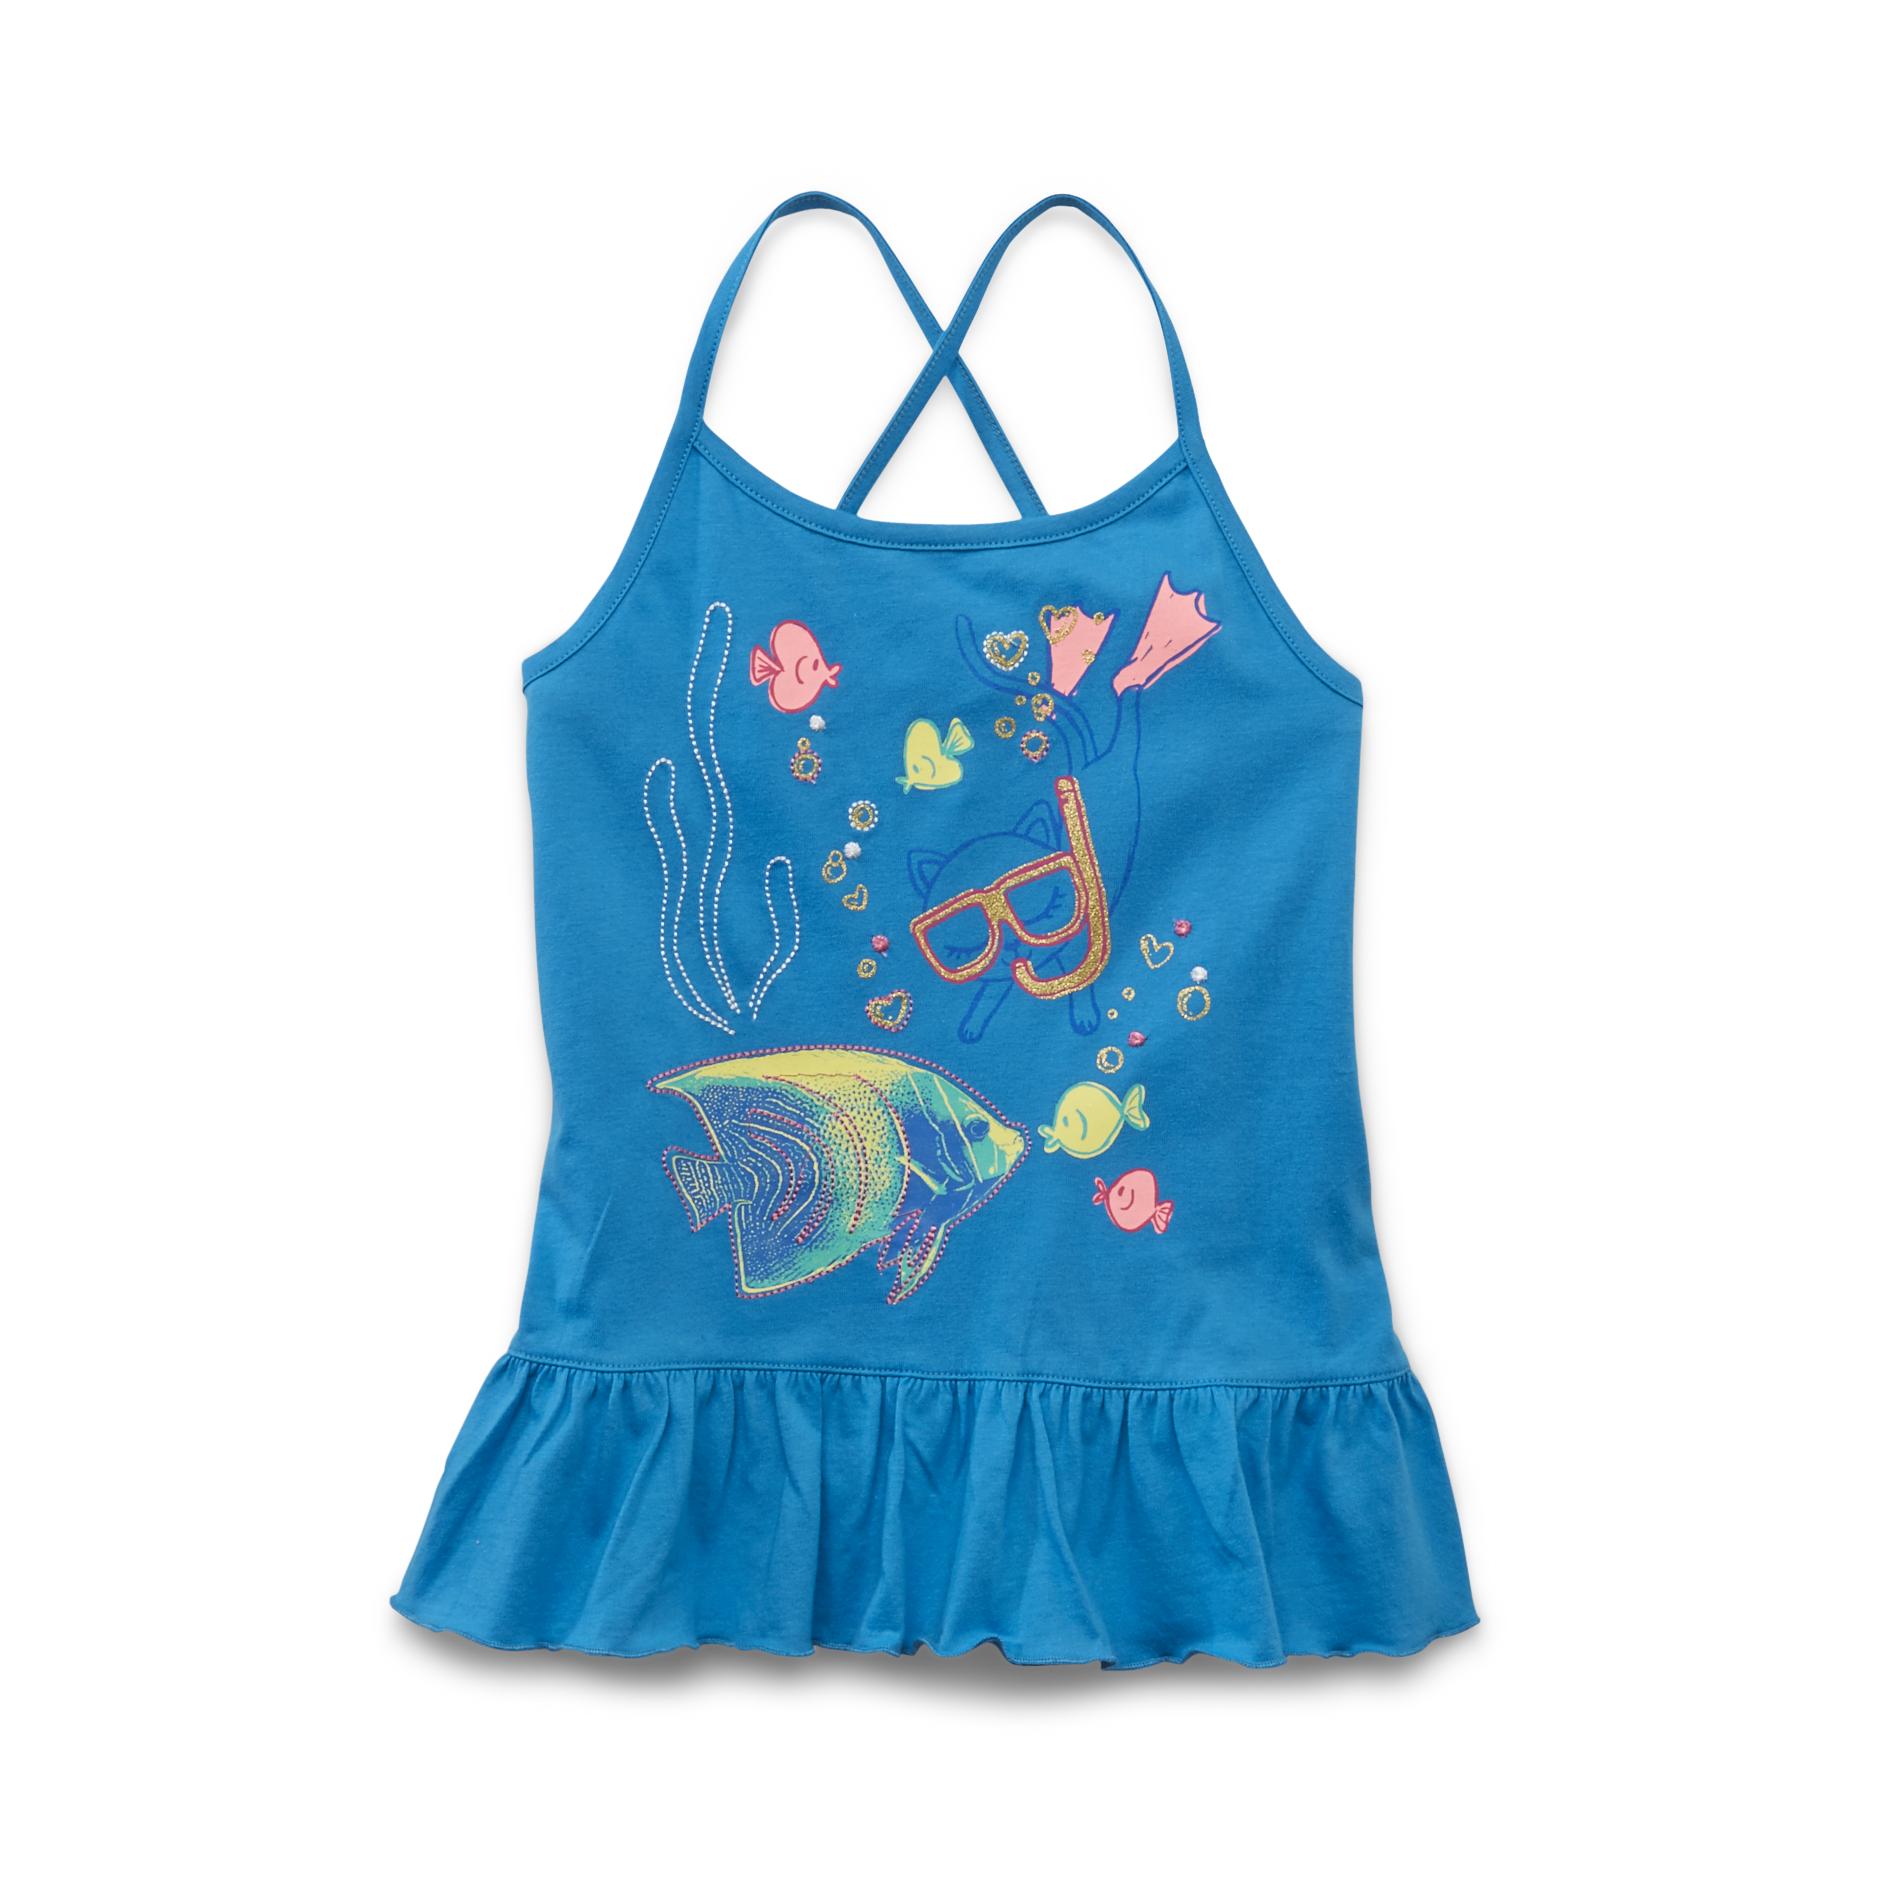 Toughskins Girl's Strappy Tank Top - Fish & Kitty Cat